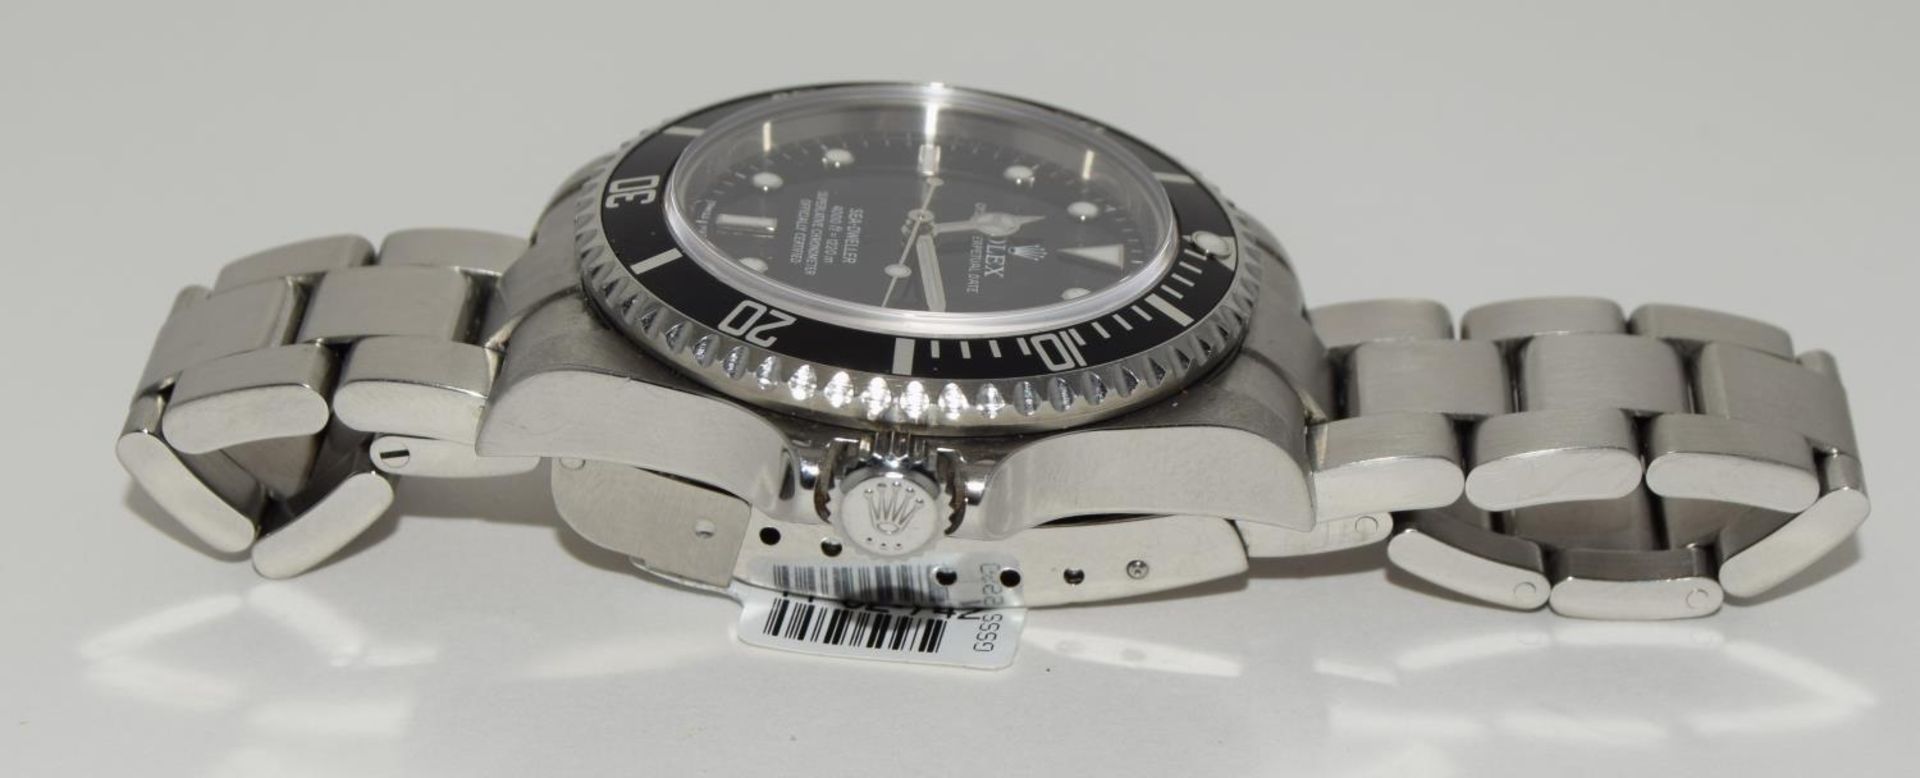 Rolex Sea Dweller mopd-16600, 2006, boxed and papers. (ref 8) - Image 2 of 7